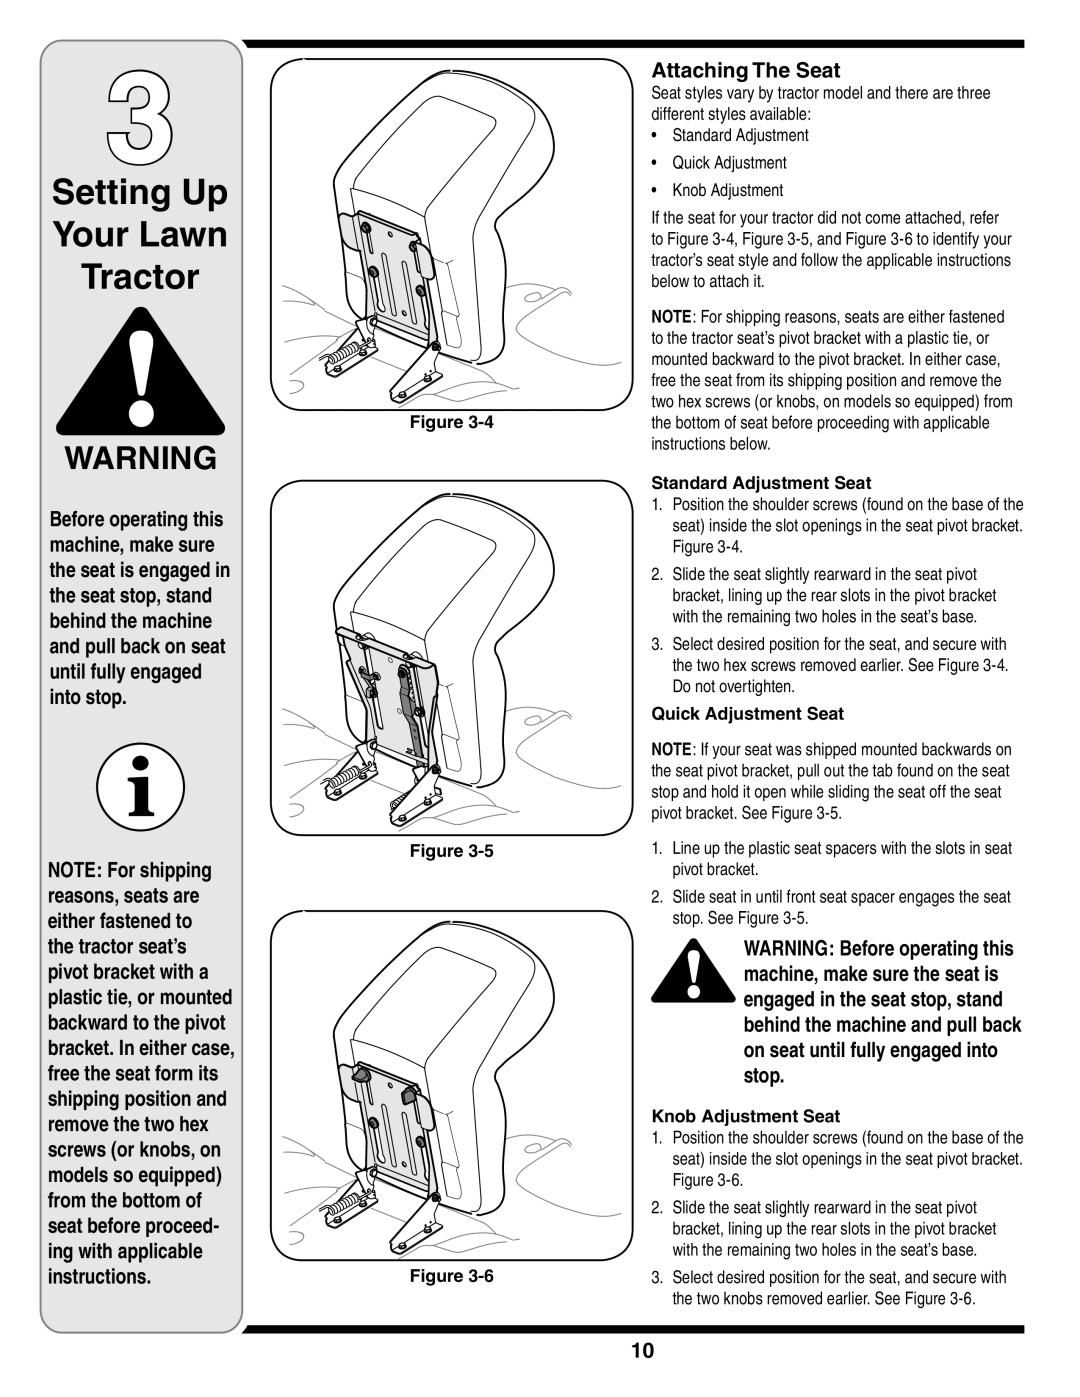 MTD 616 warranty Setting Up Your Lawn Tractor, Attaching The Seat, Standard Adjustment Seat, Quick Adjustment Seat 